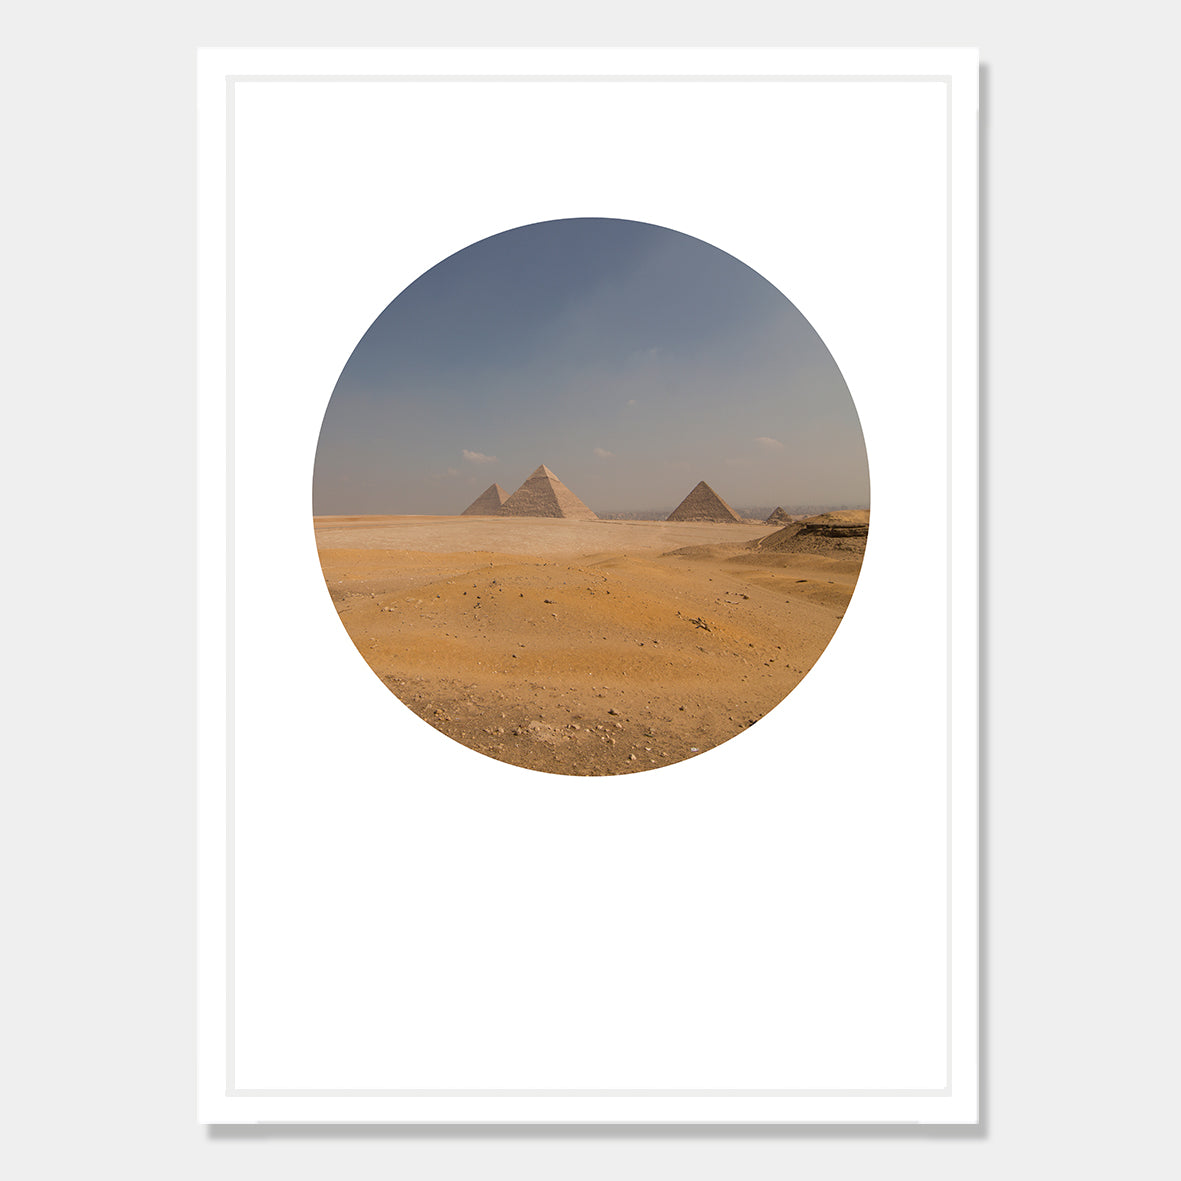 Photographic art print of the Great Pyramids, Egypt by Chris Starkey. Printed in New Zealand by endemicworld and framed in white.